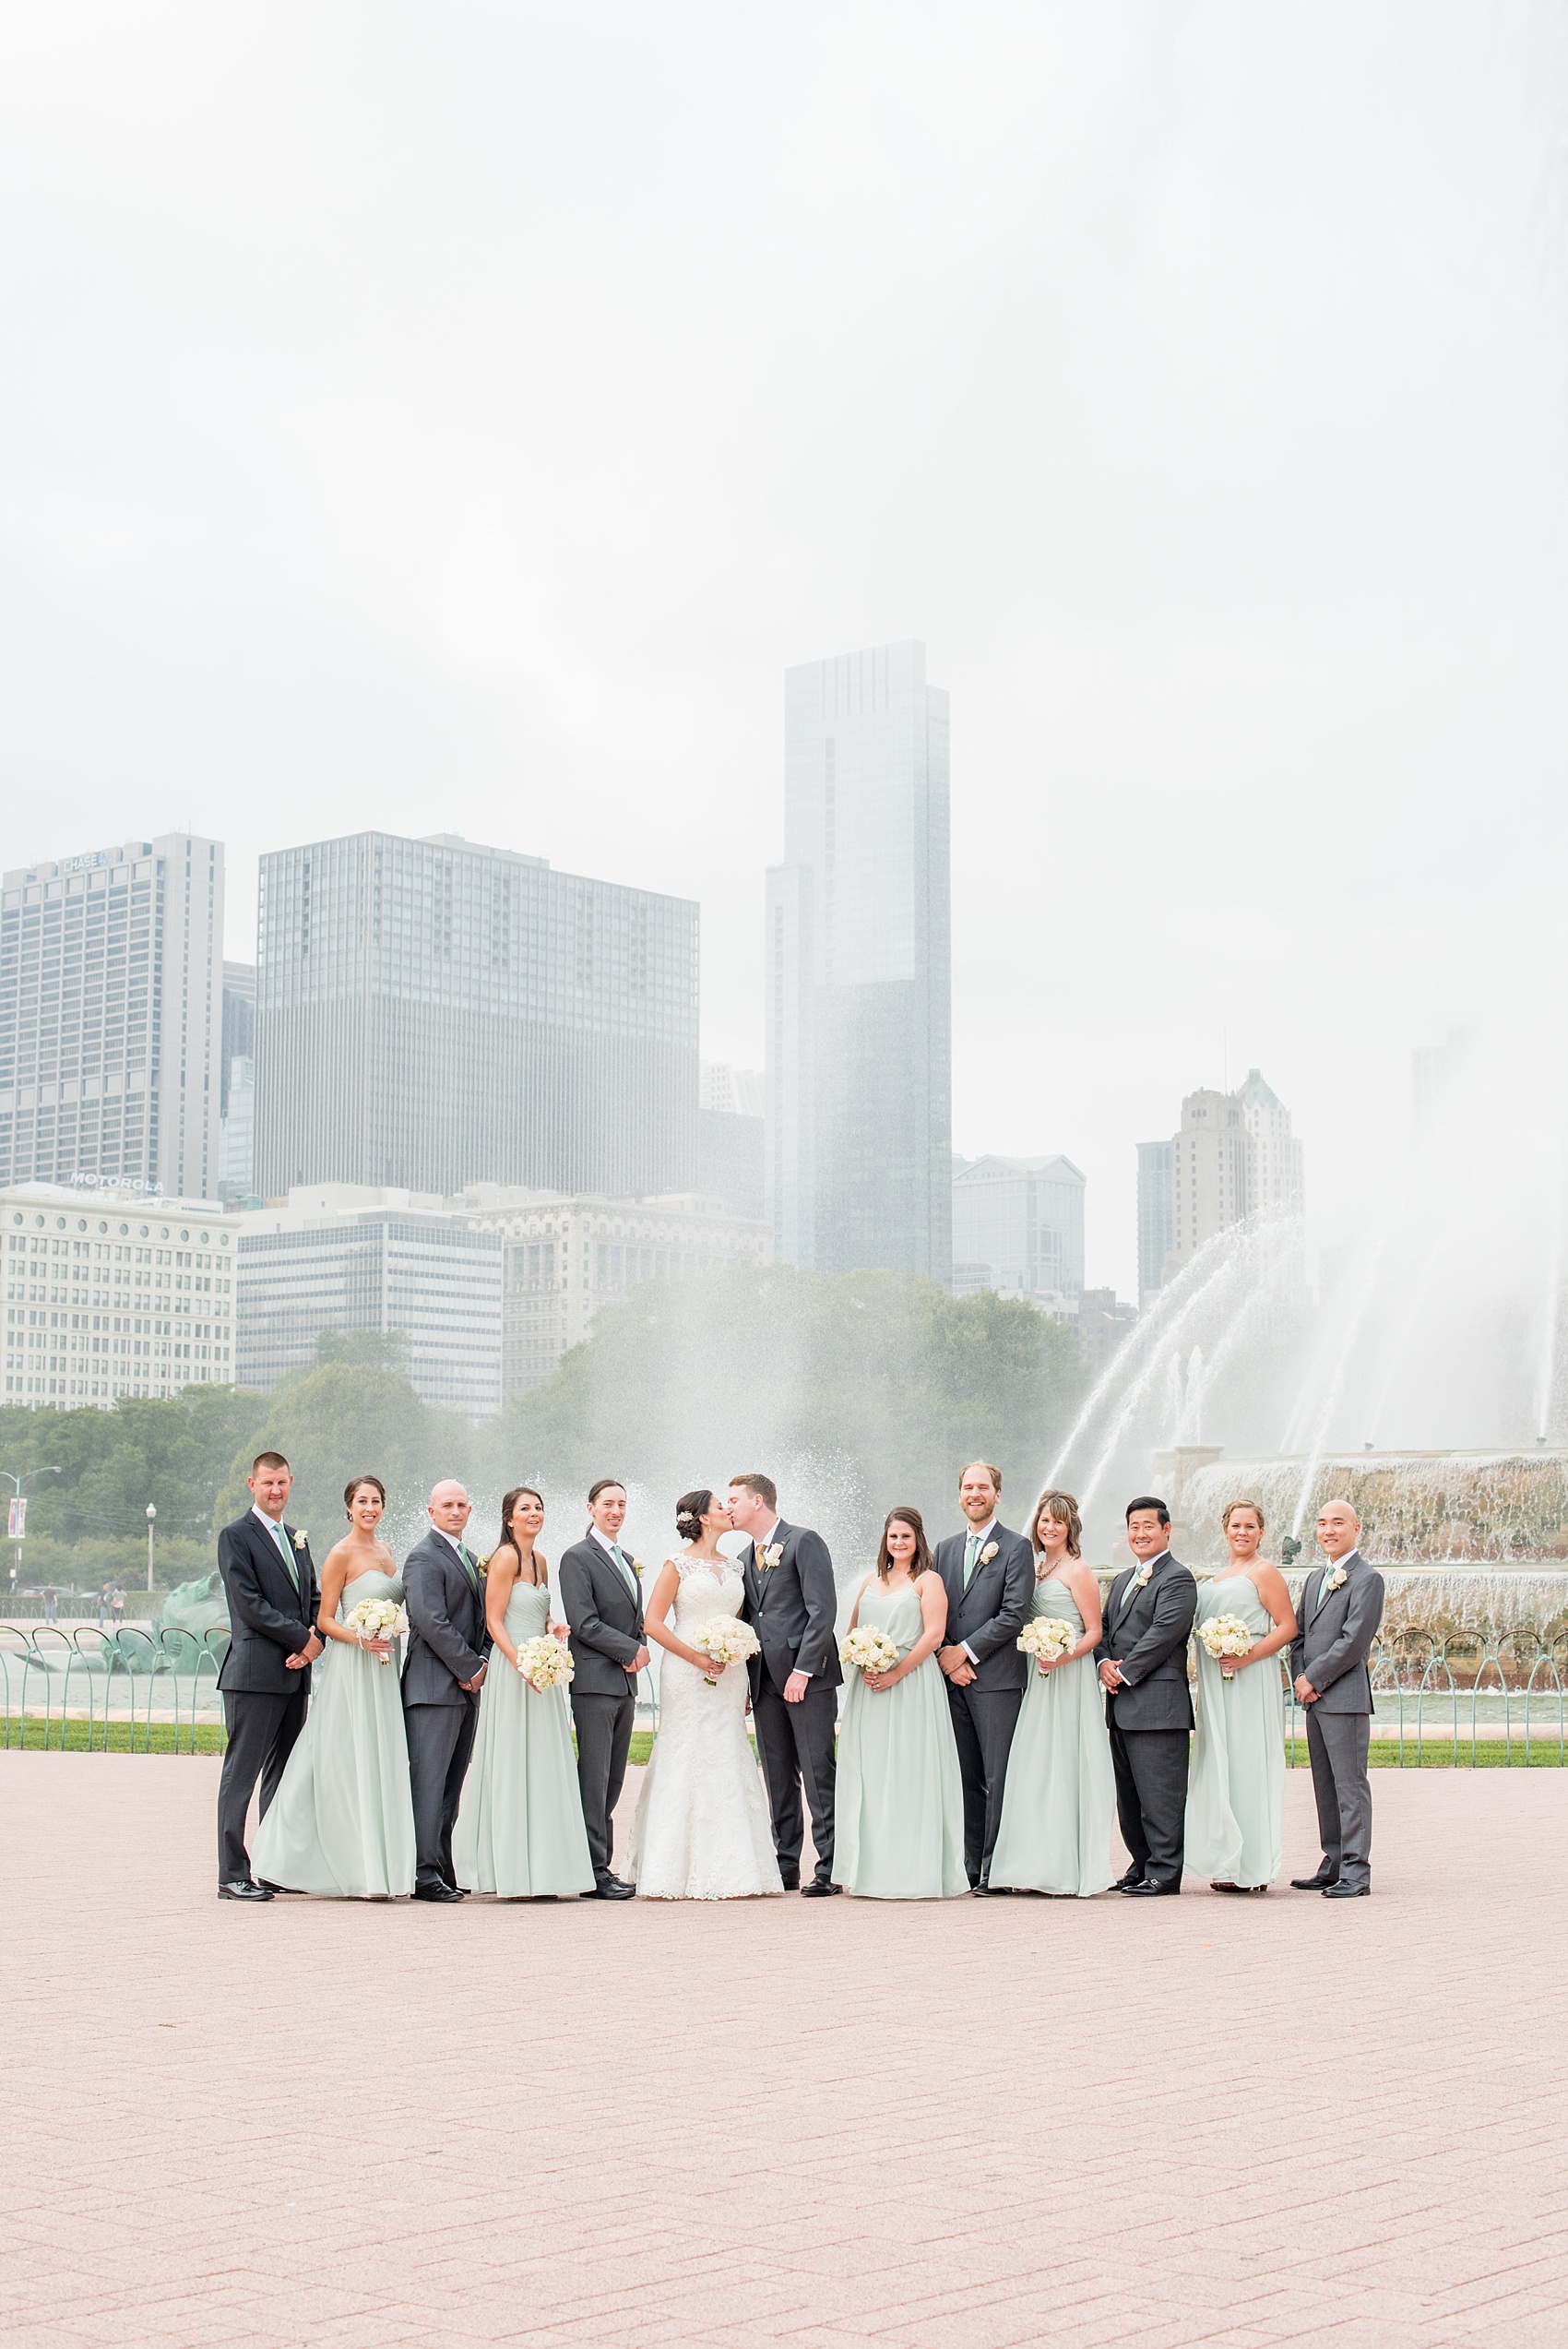 Mikkel Paige Photography photos of a wedding in downtown Chicago at The Rookery. Iconic, unique images of the bridal party in mint green and groomsmen in grey suits for wedding party pictures at Buckingham Fountain.